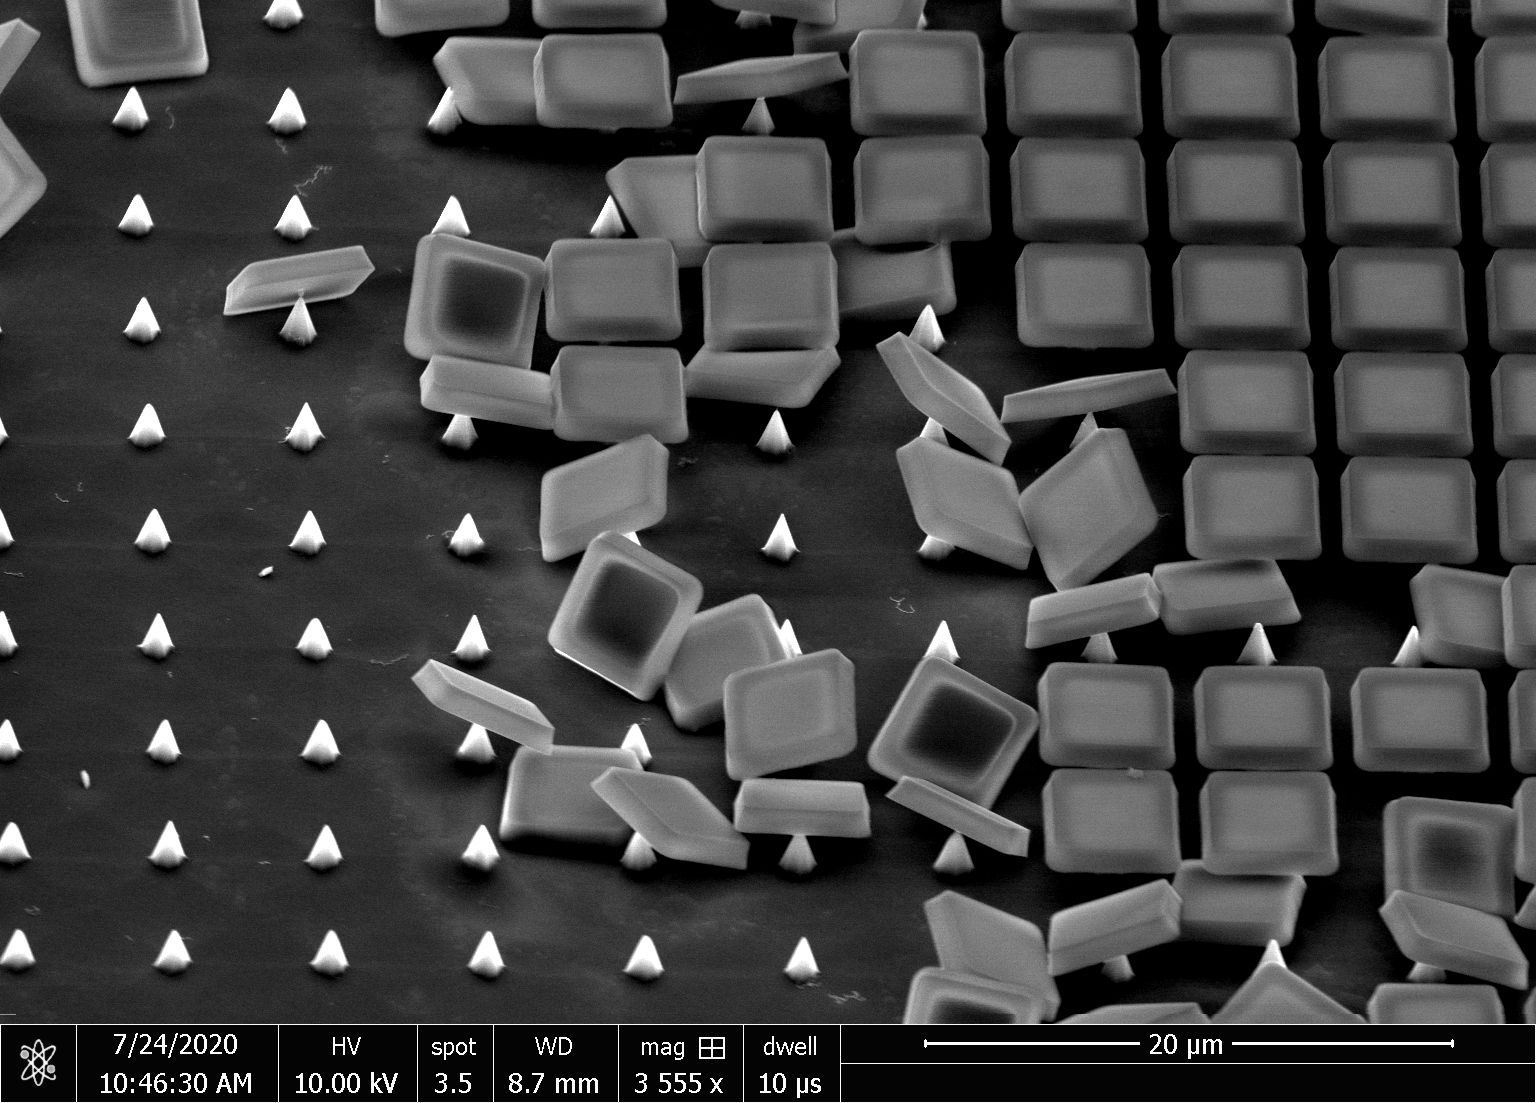 'Life in 2020 - Balancing Act': These pointed pyramidal structures were obtained by a KOH-based isotropic silicon wet etch process. A 1 µm thick oxide masking layer is patterned and etched to obtain squares with 4 µm sides and 1 µm gap. This picture was imaged just before the release of the oxide caps from the pointed pyramidal silicon structures. These structures will be used to puncture the cell walls of biological cells. This image is a part of research integrating semiconductor-based components and functionality into soft microfluidics for the lysis of microbial cells (<5 µm) for single cell genomics and other biological applications. The tool used for imaging is an SEM FEI Quanta 650.